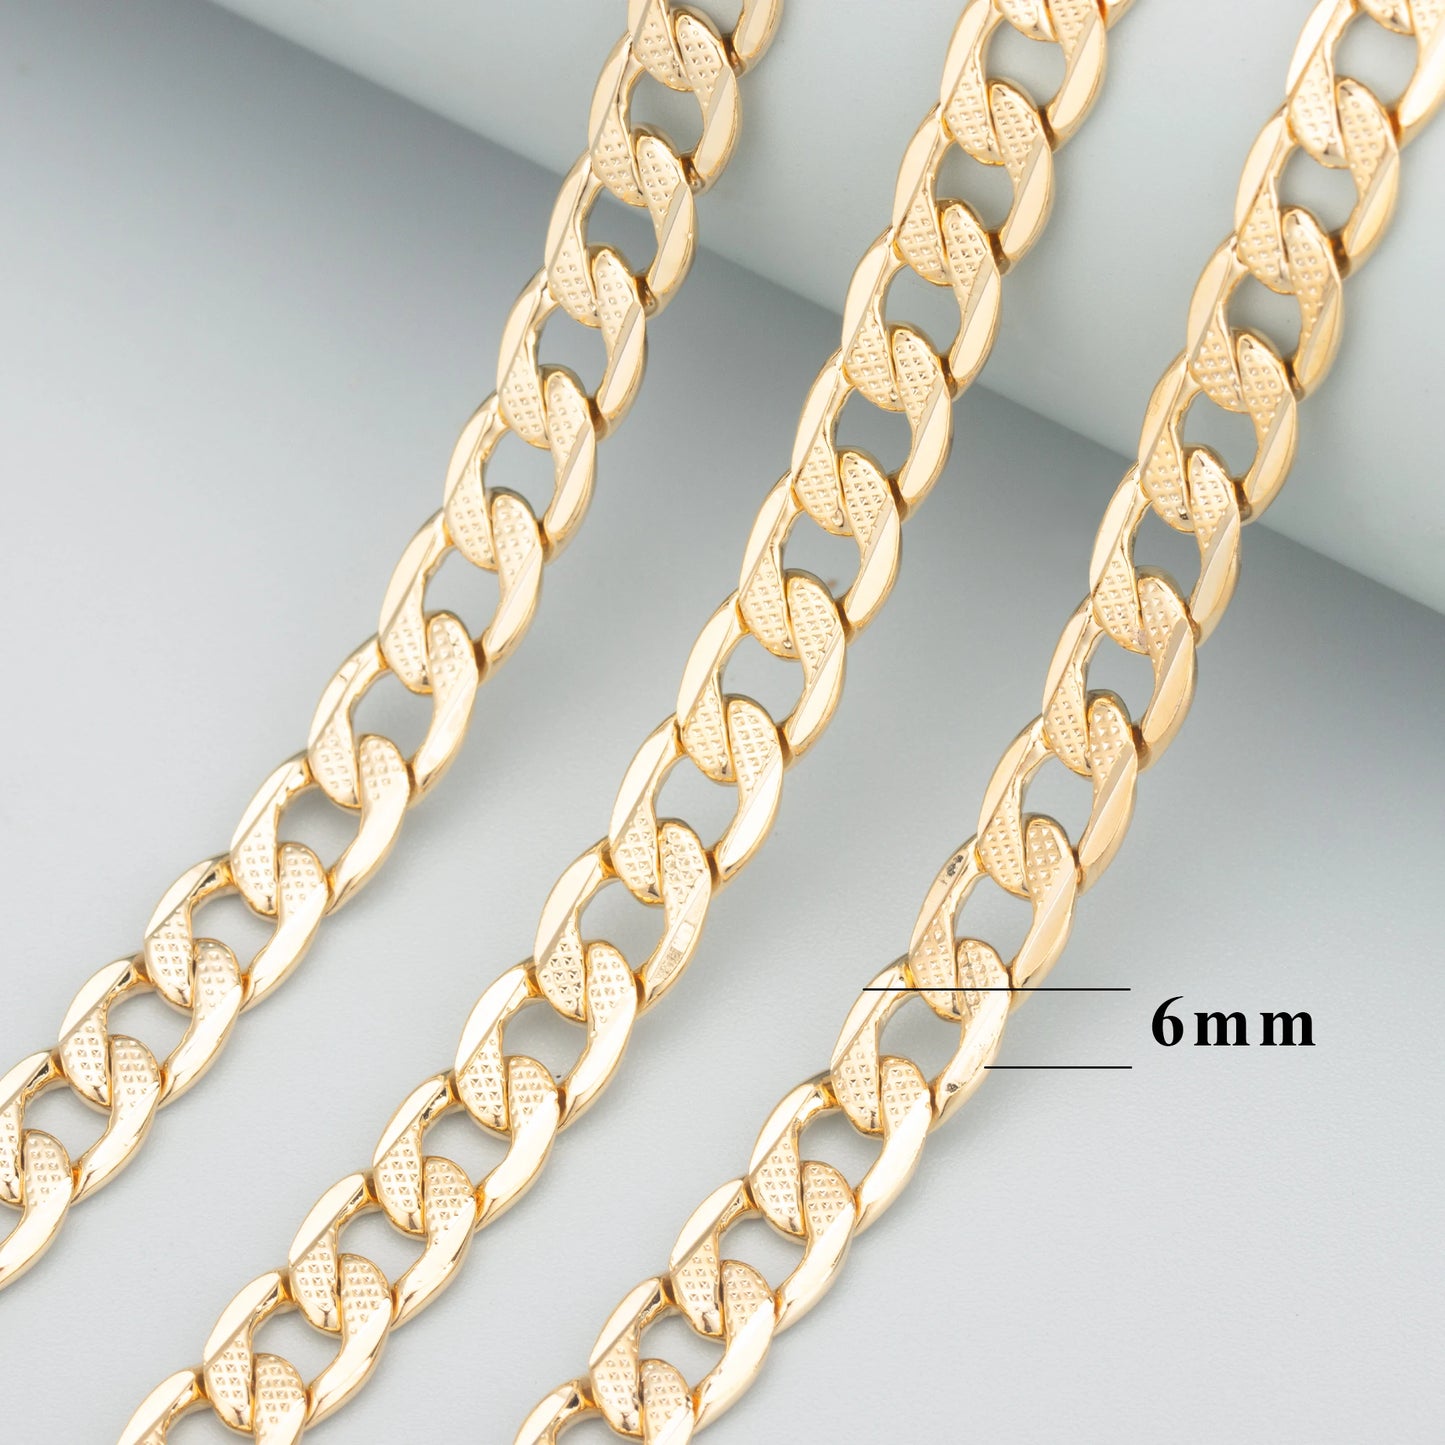 GUFEATHER C151,jewelry accessories,pass REACH,nickel free,diy chain,18k gold plated,copper,diy necklace,jewelry making,1m/lot